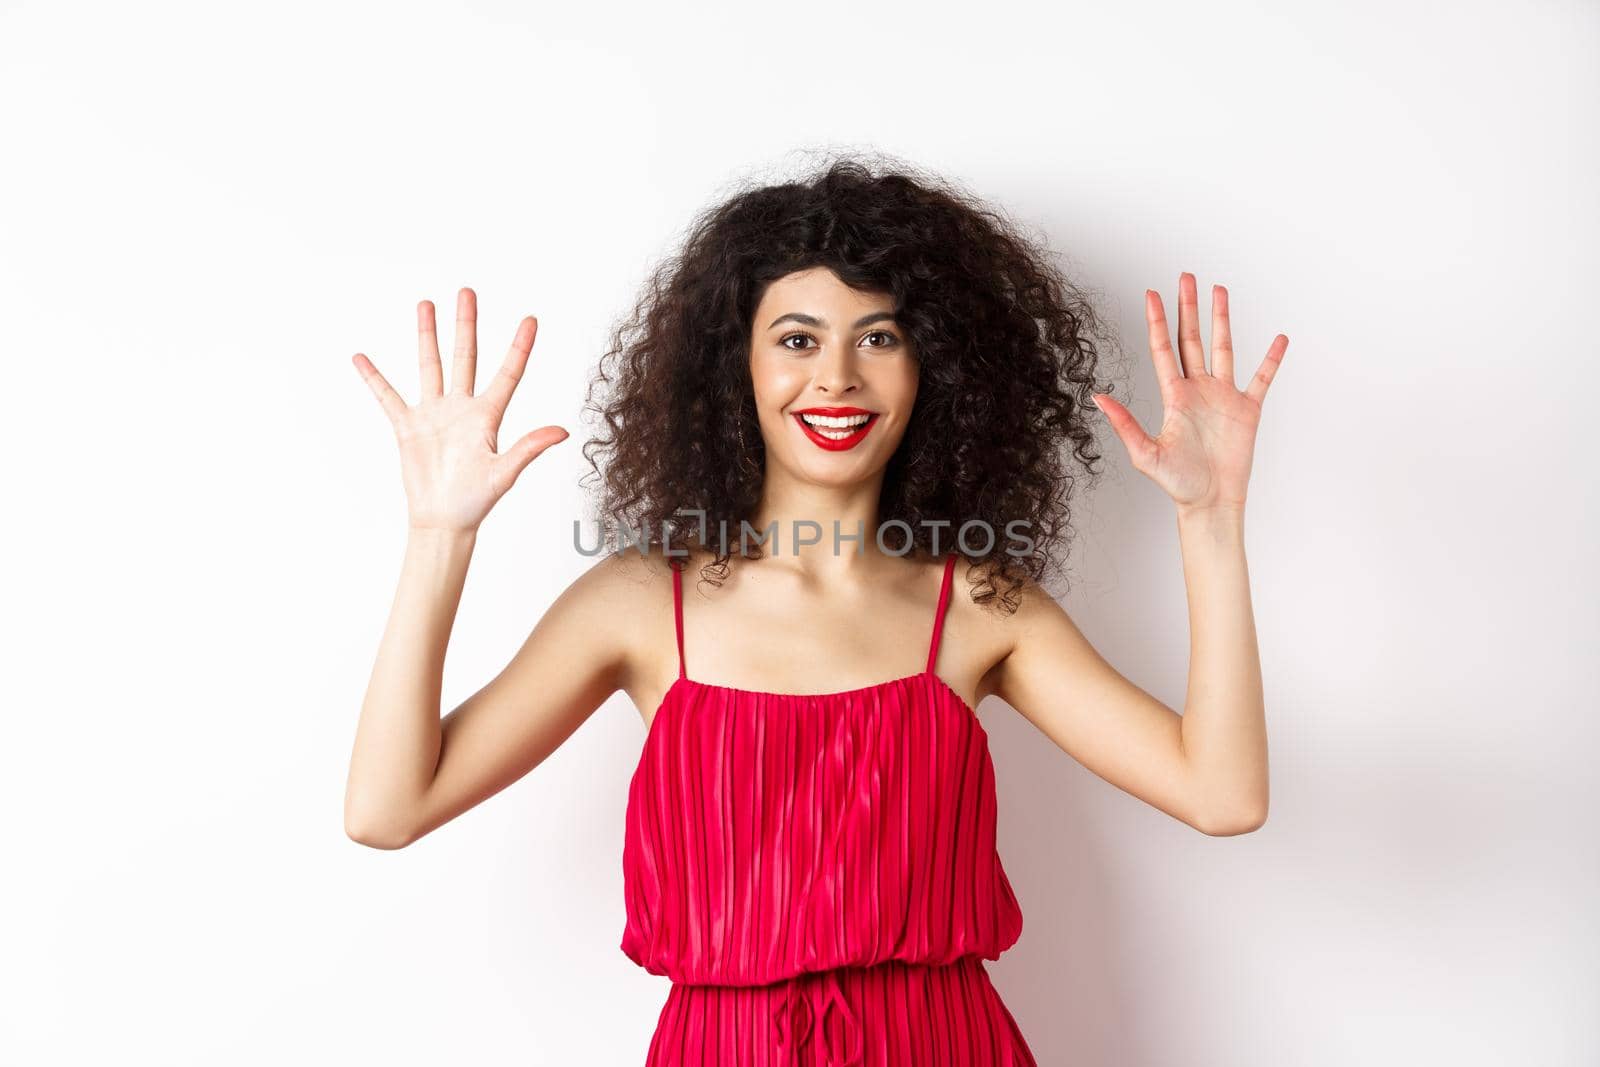 Beautiful female model with curly hair, wearing red dress, showing number ten with fingers, standing against white background.